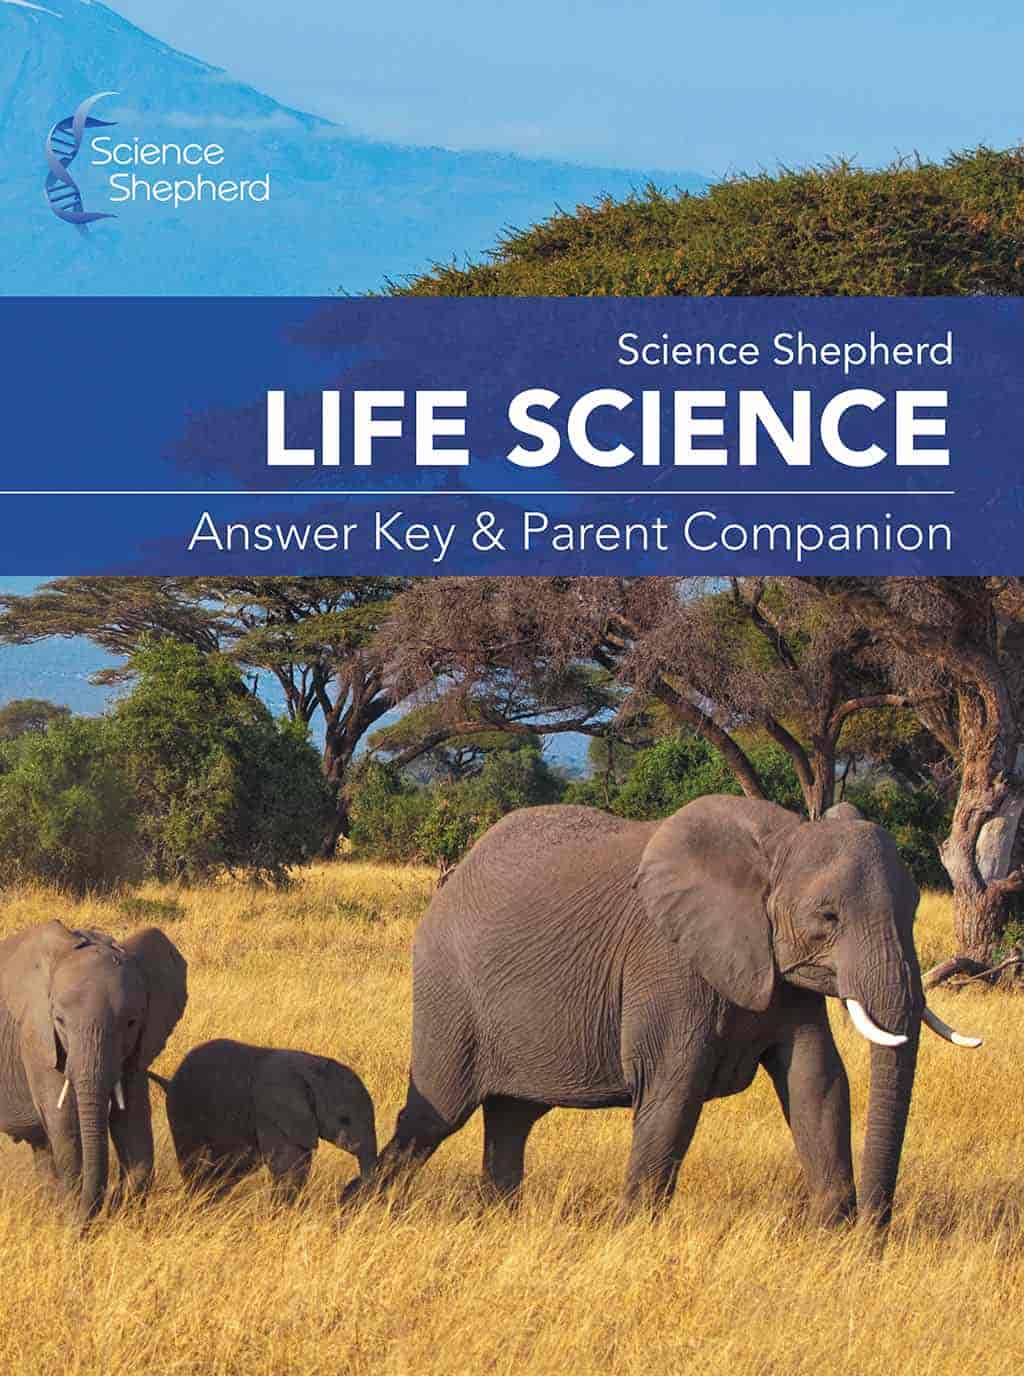 Life Science homeschooling Answer Key & Parent Companion 2nd Ed. book cover of elephants in Africa